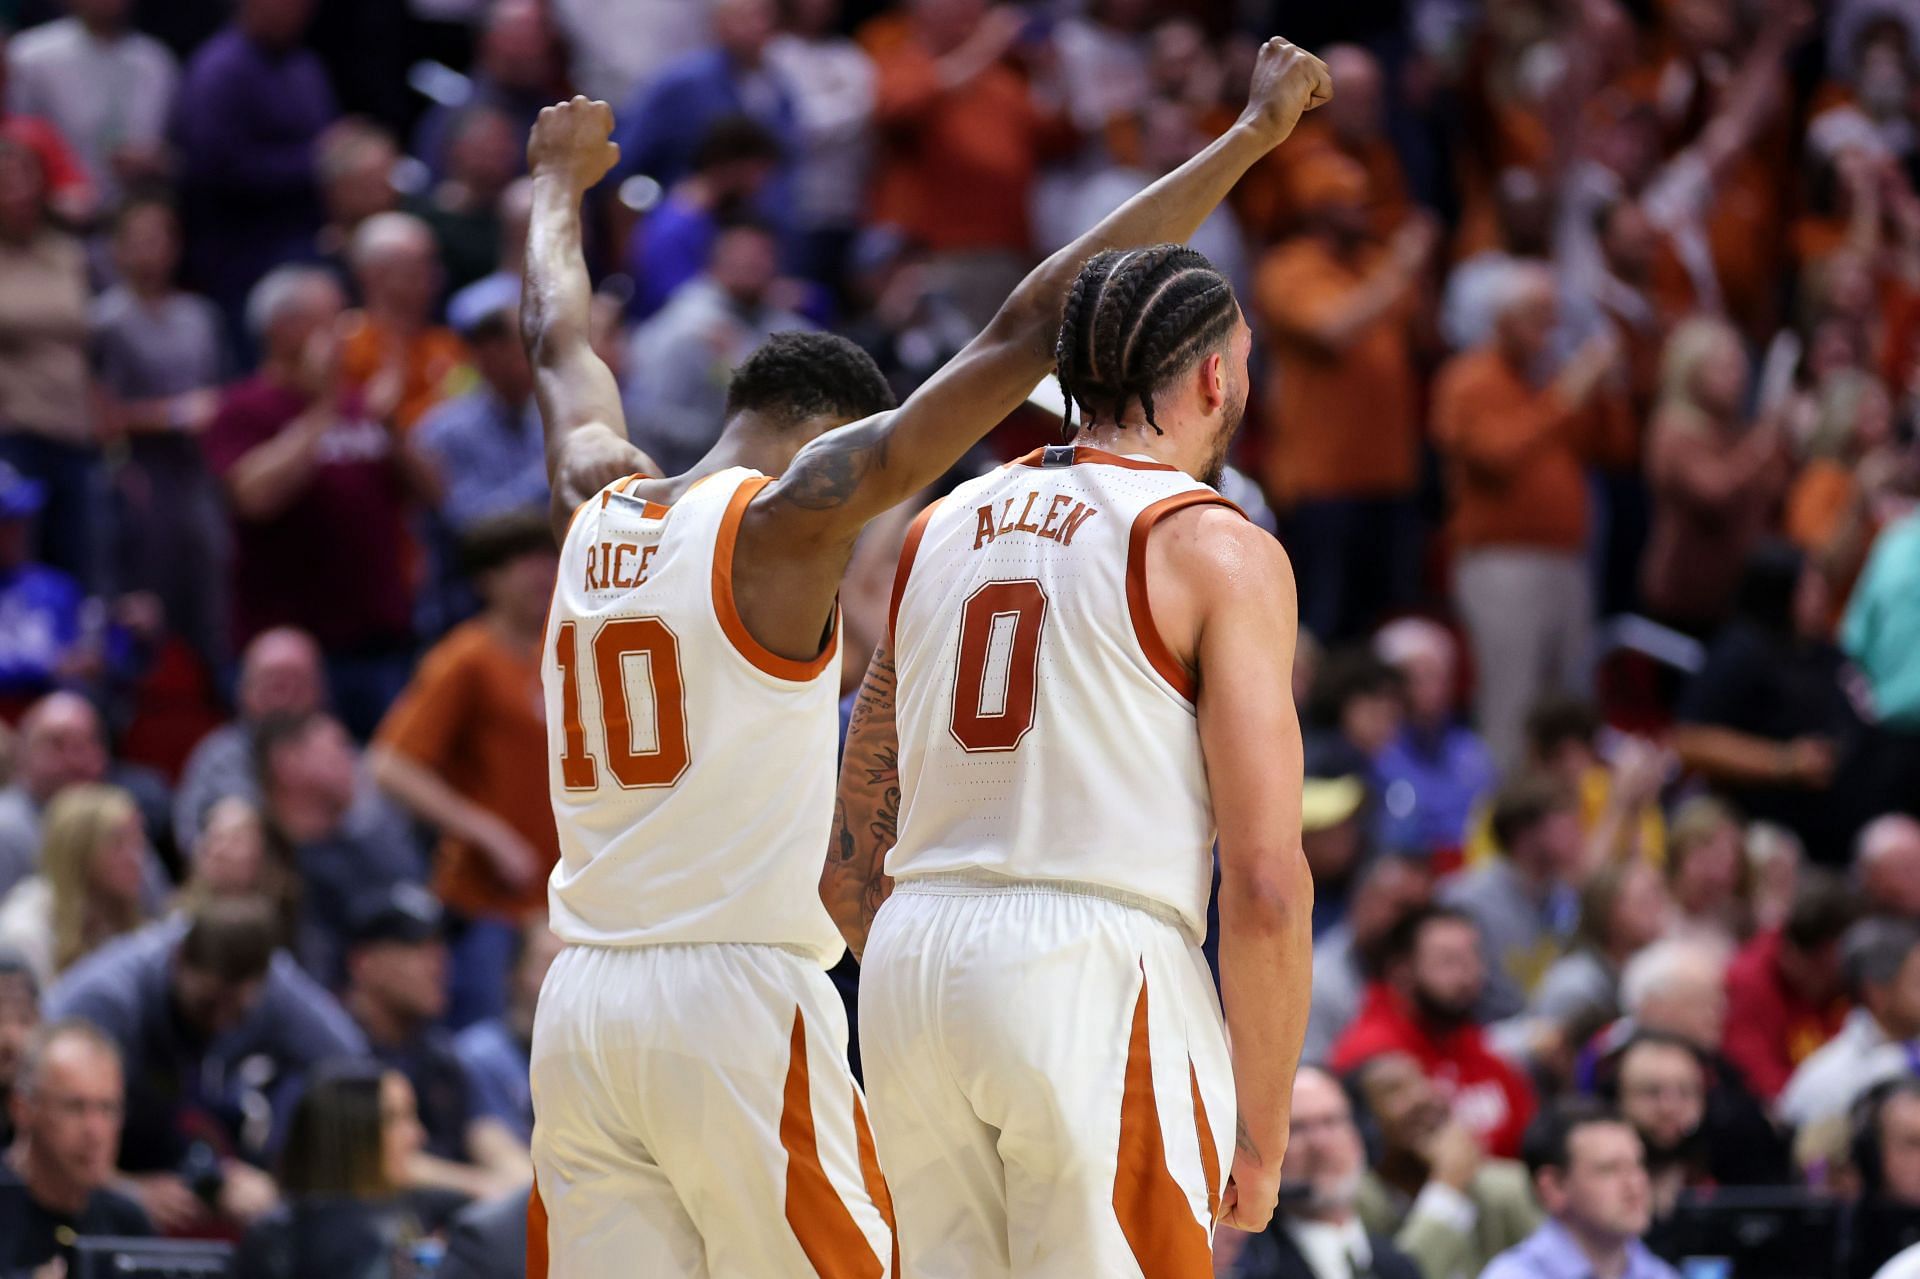 The Longhorns could also win it all in March Madness 2023 (Image via Getty Images)